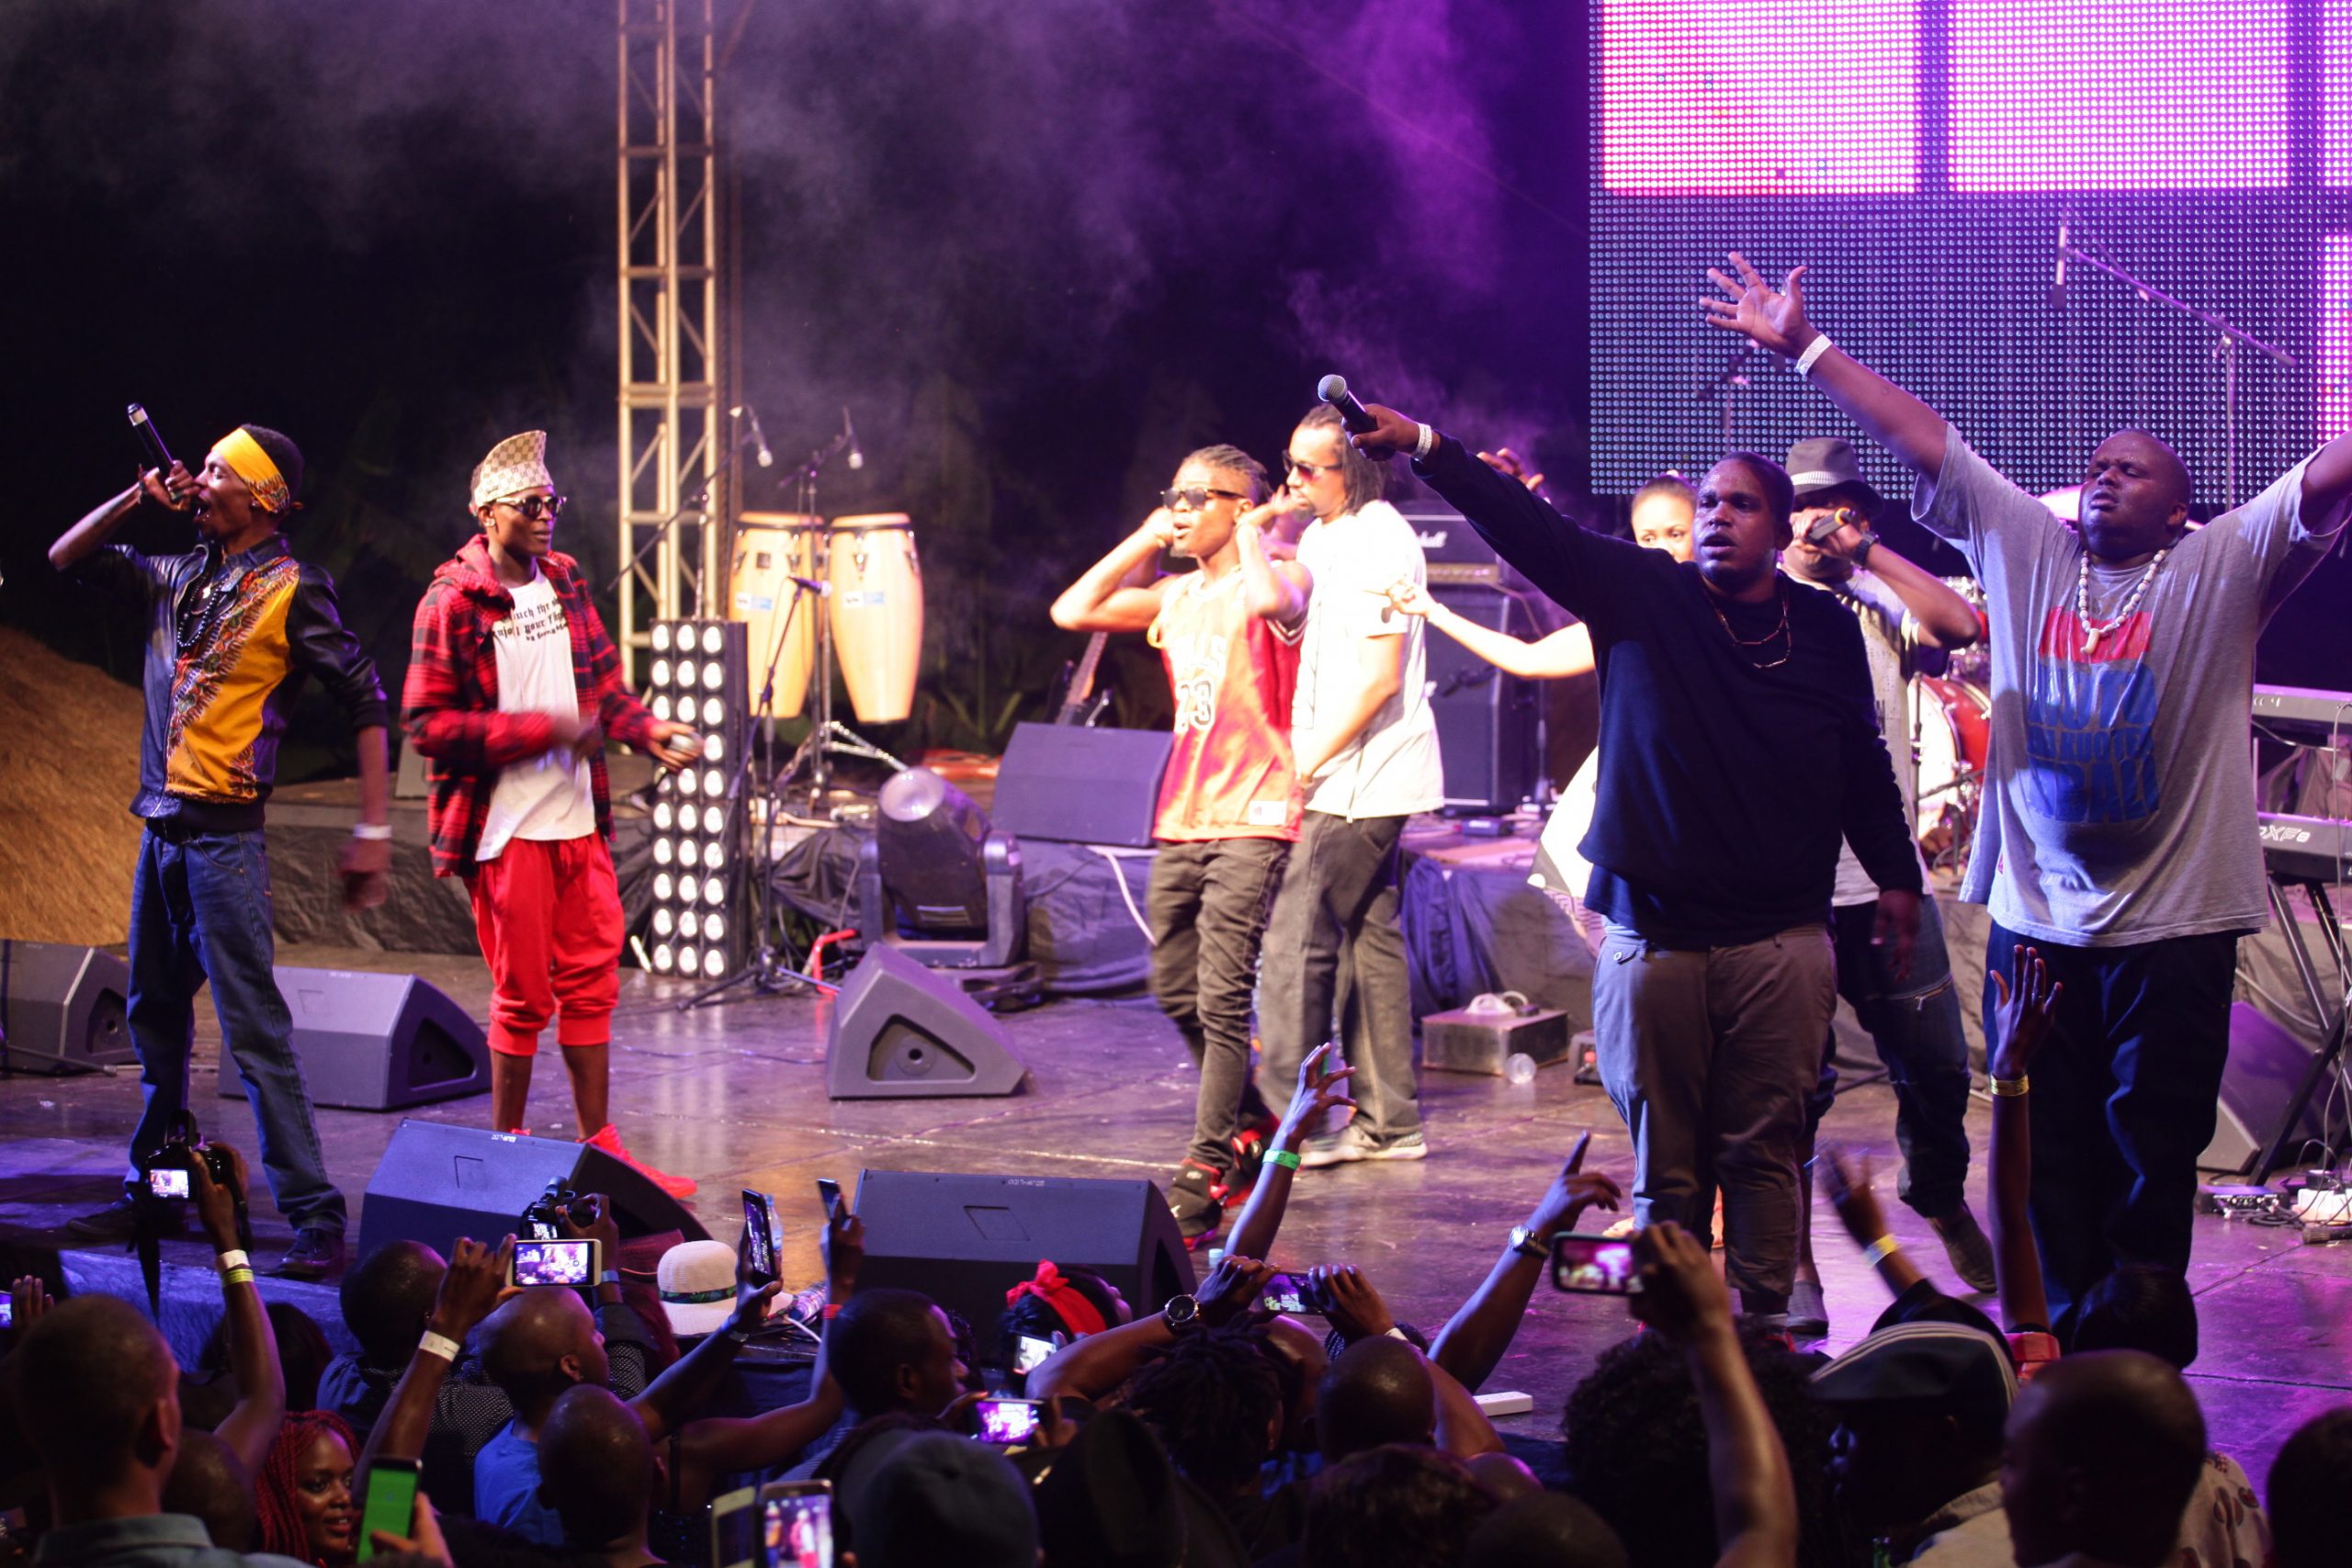 Madtraxx (far right), Majja and Kid Kora (far left) of the musical group- The Kansol are joined on stage  by chameleon, Navio and Weasel during the 11th Edition of Blankets and Wines